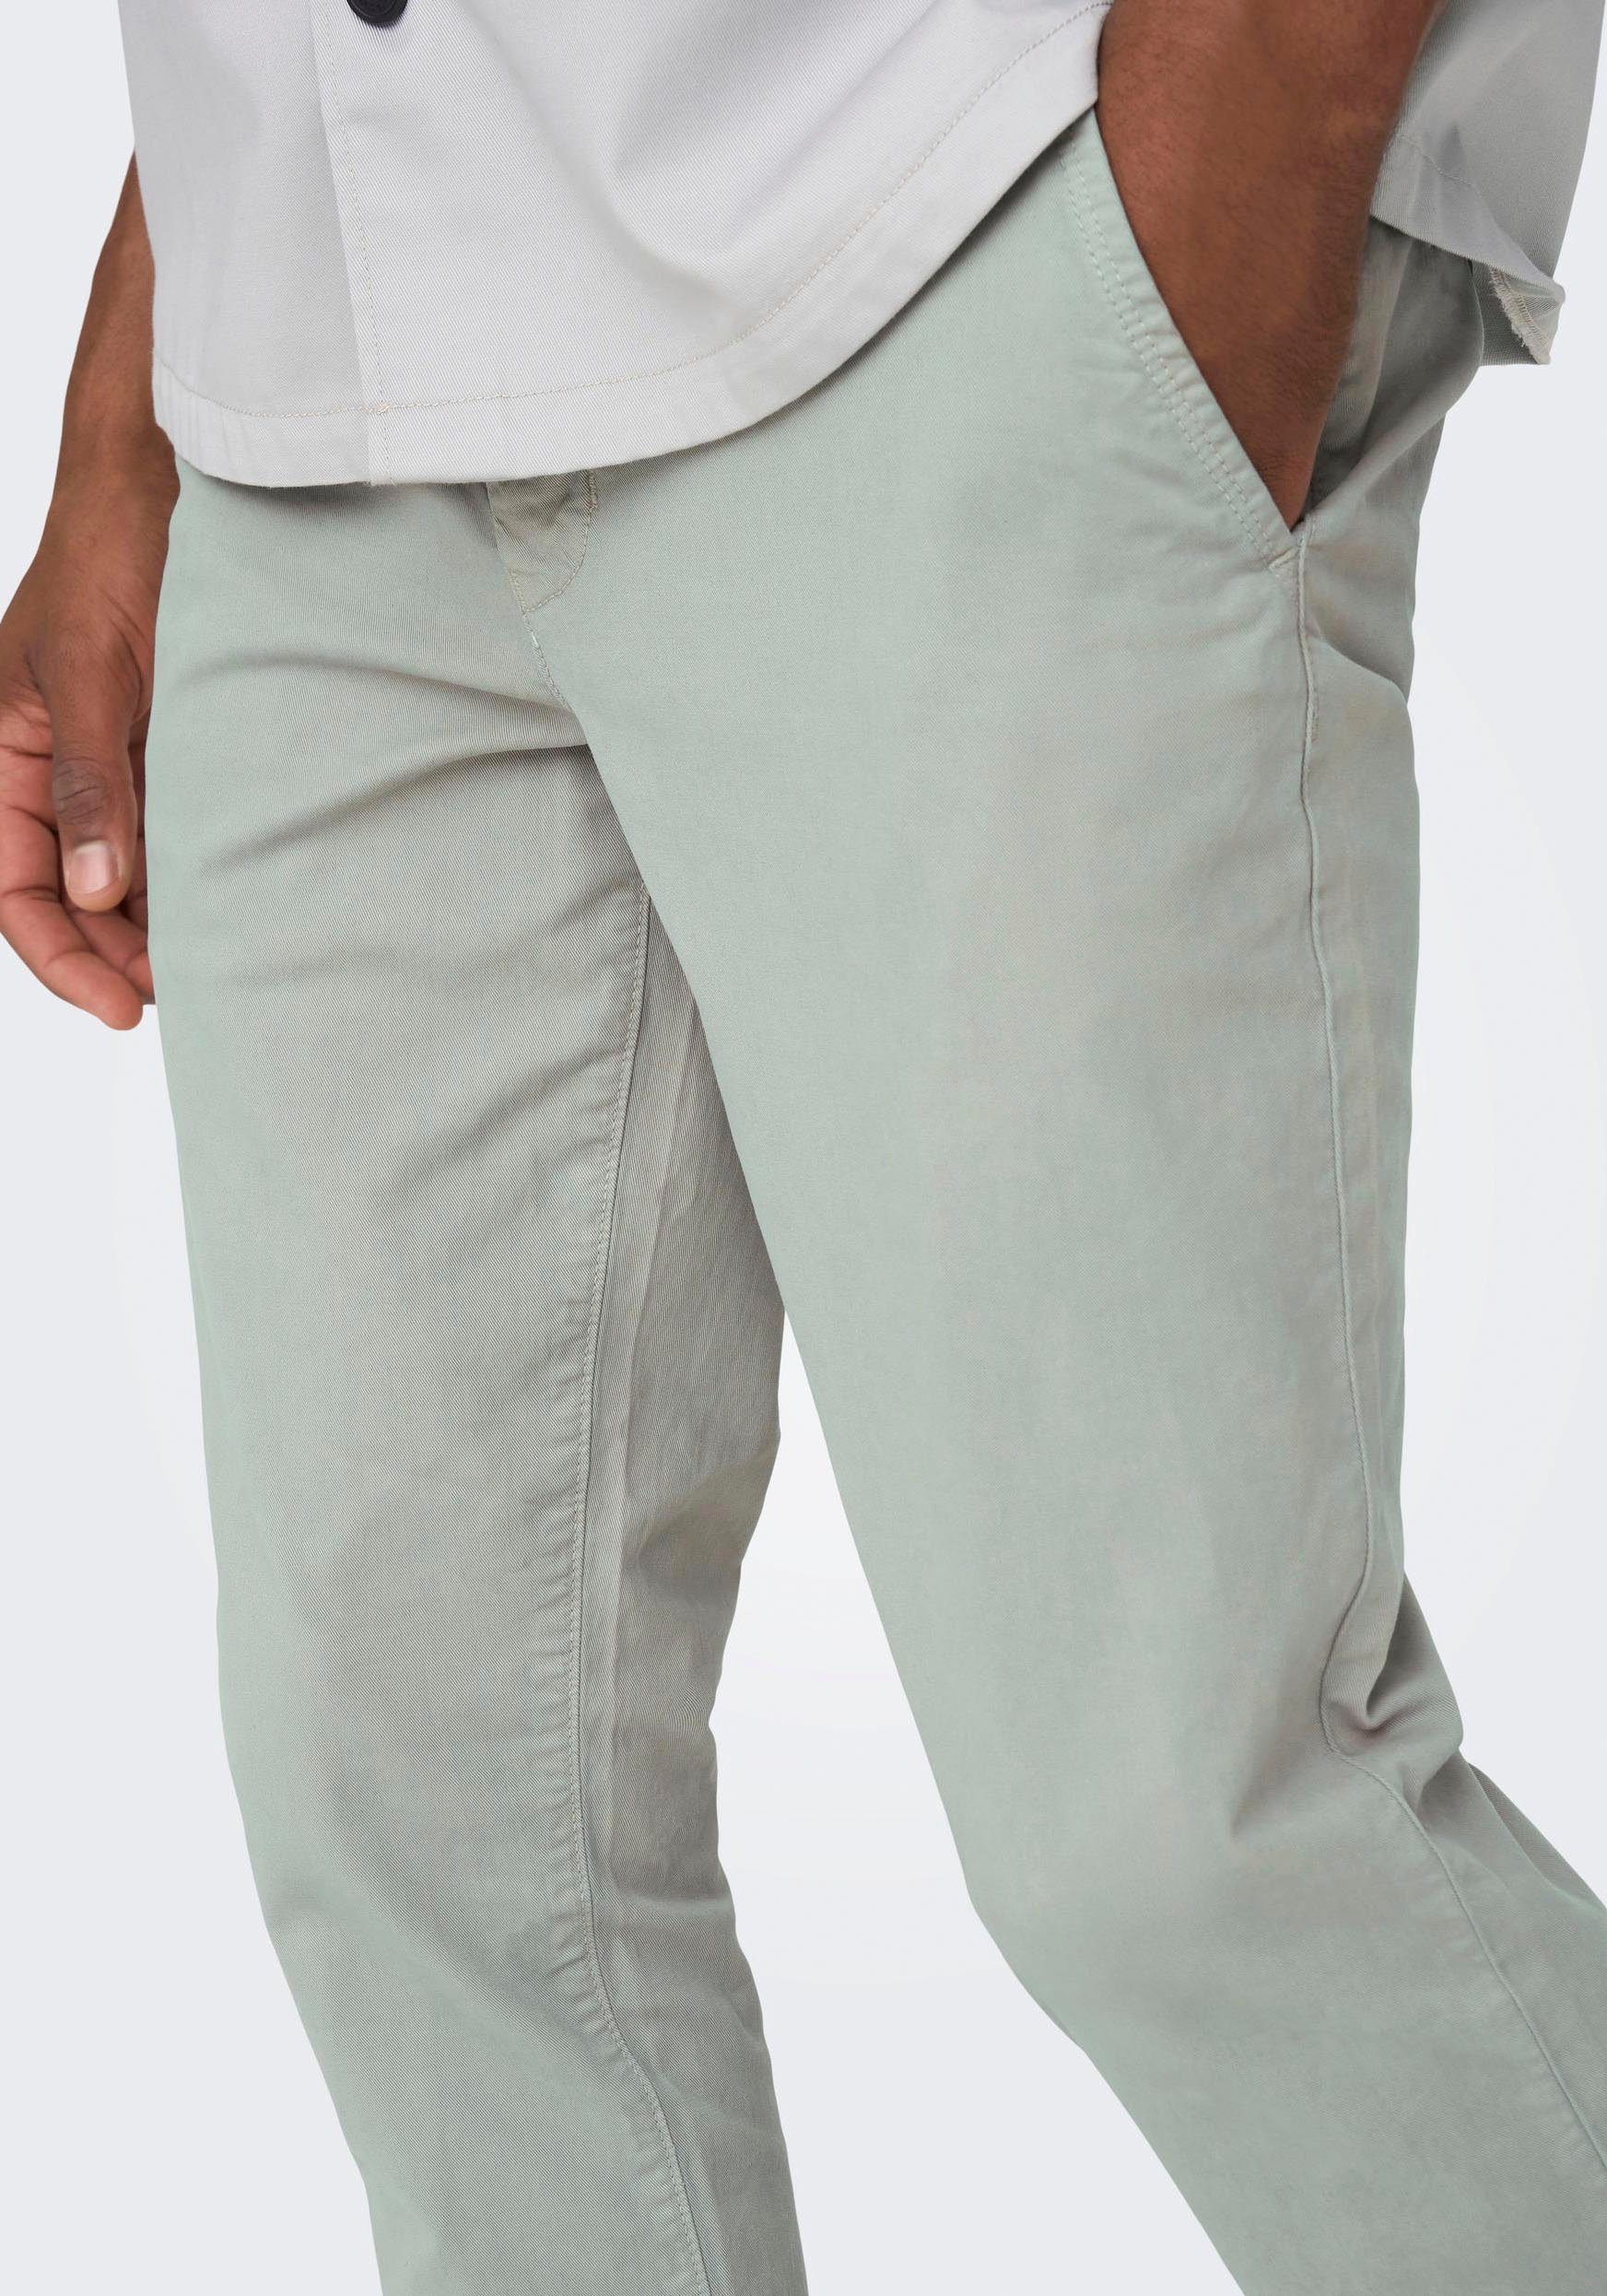 ONLY & SONS limestone im 4-Pocket-Style Chinohose